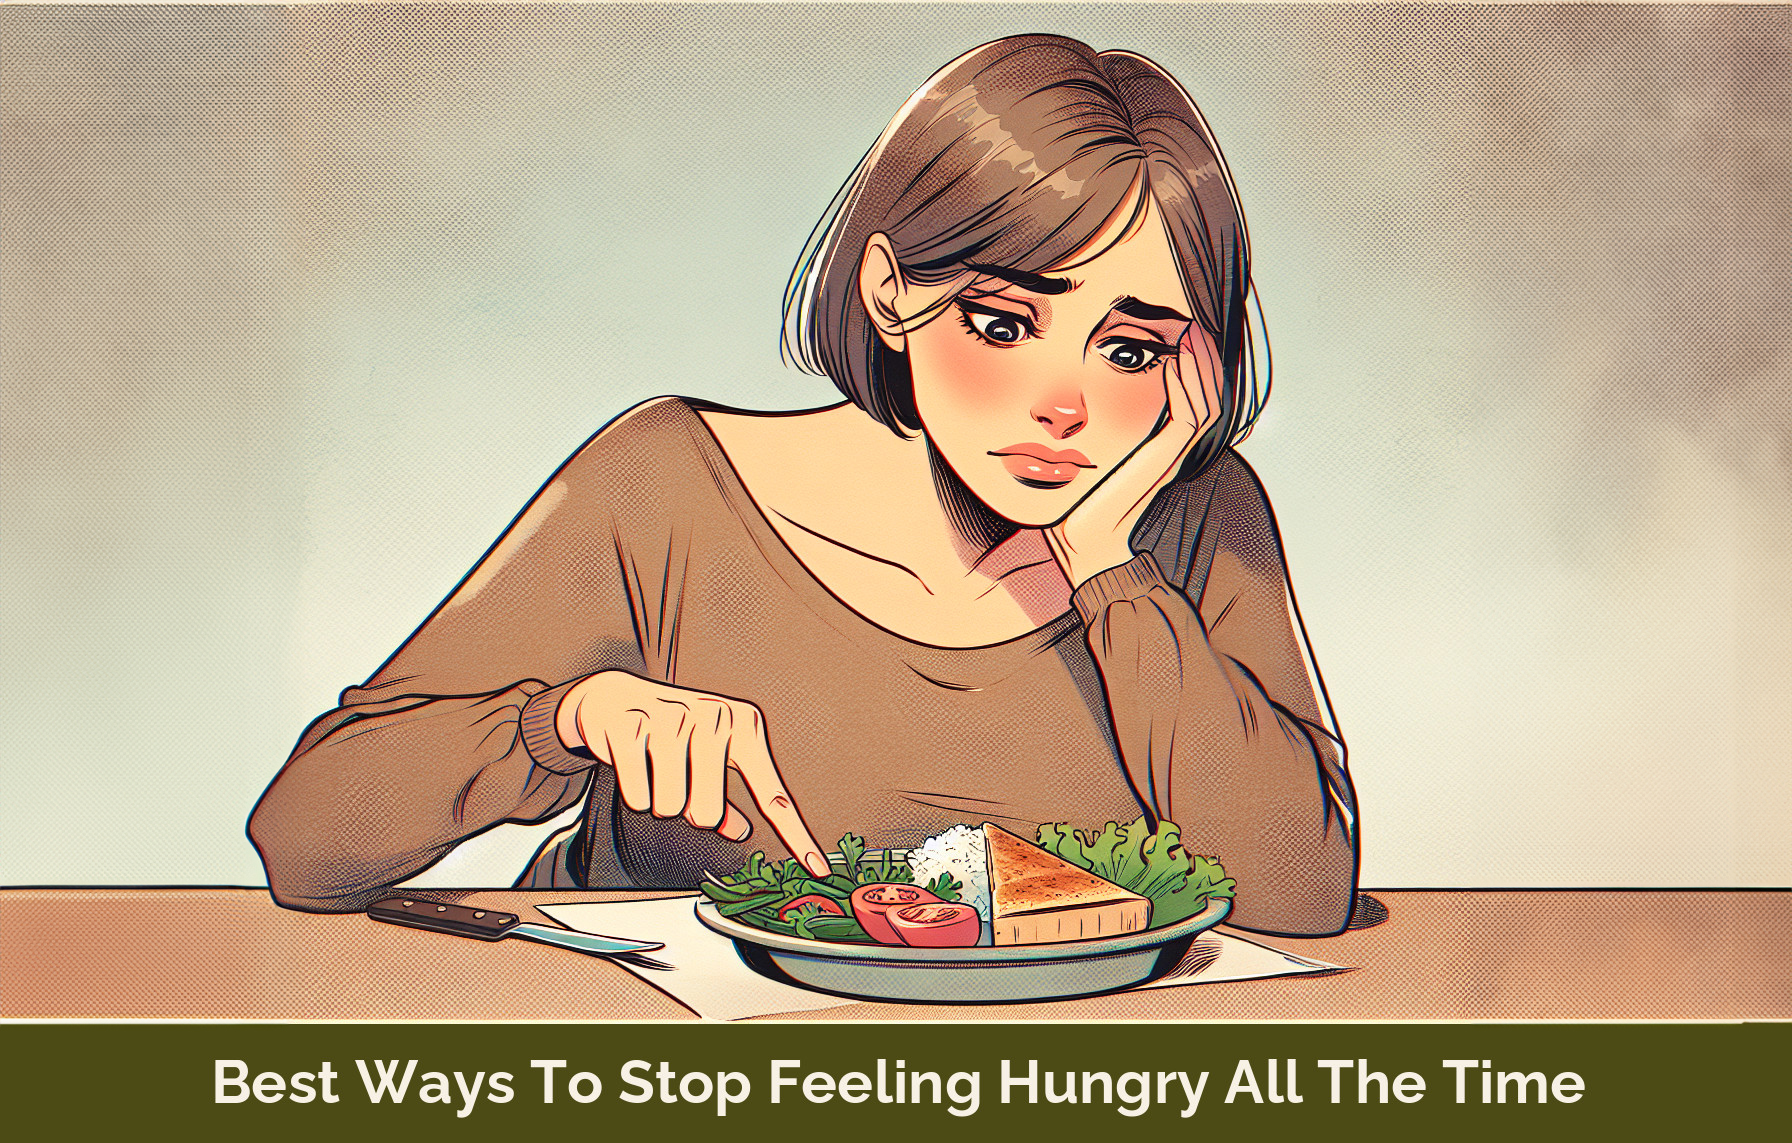 20 Best Ways To Stop Feeling Hungry All The Time